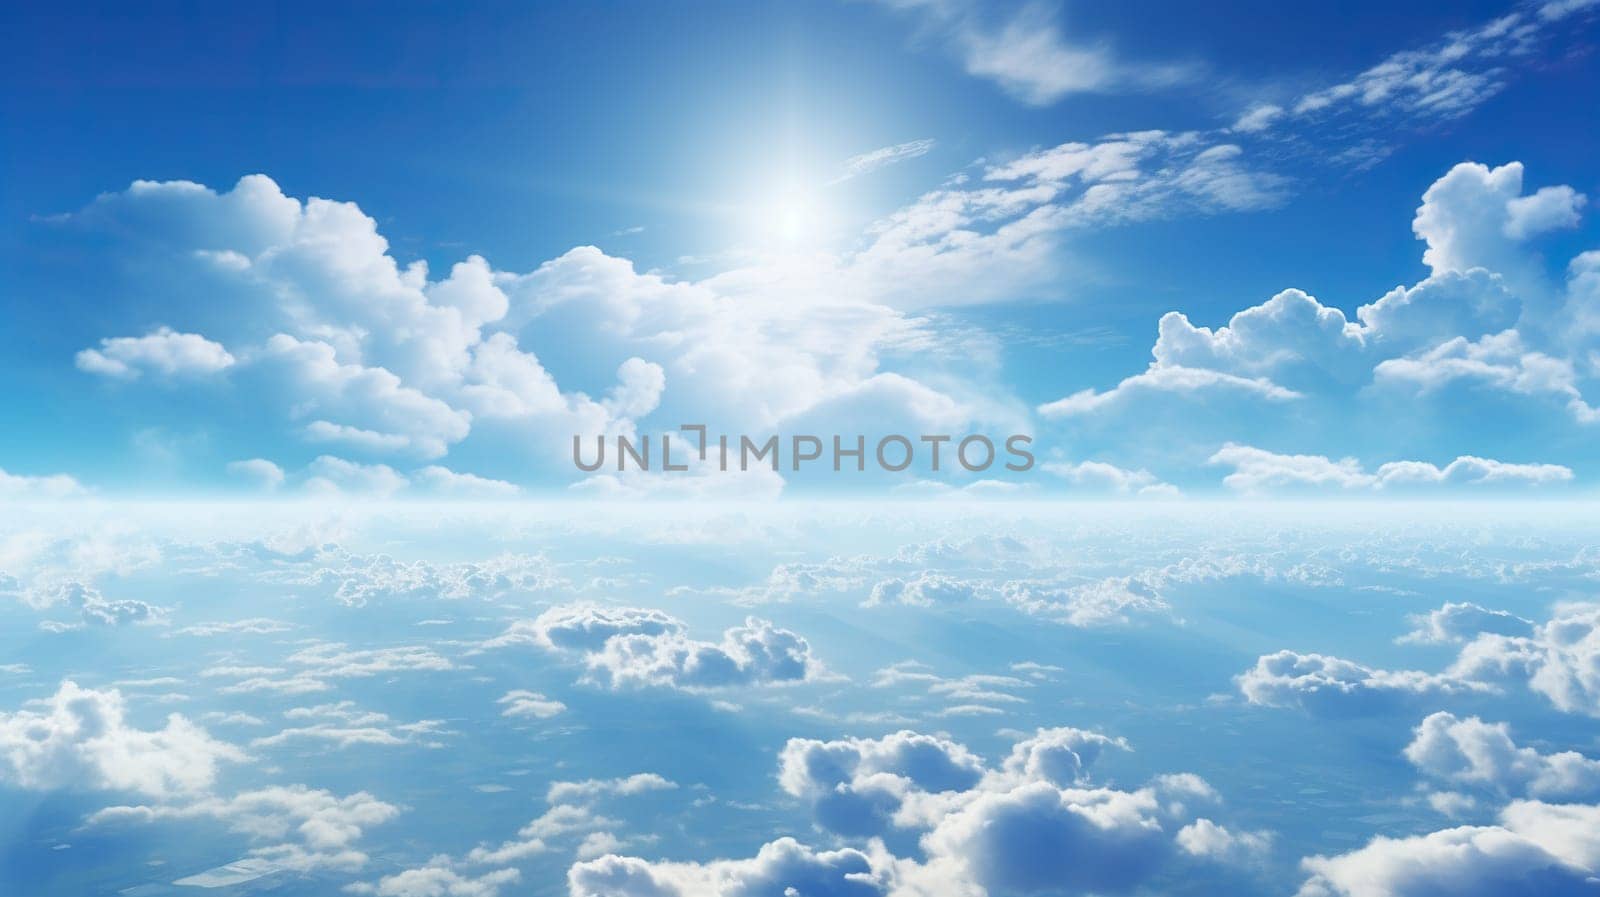 Blue sky with fluffy white clouds on a sunny day.